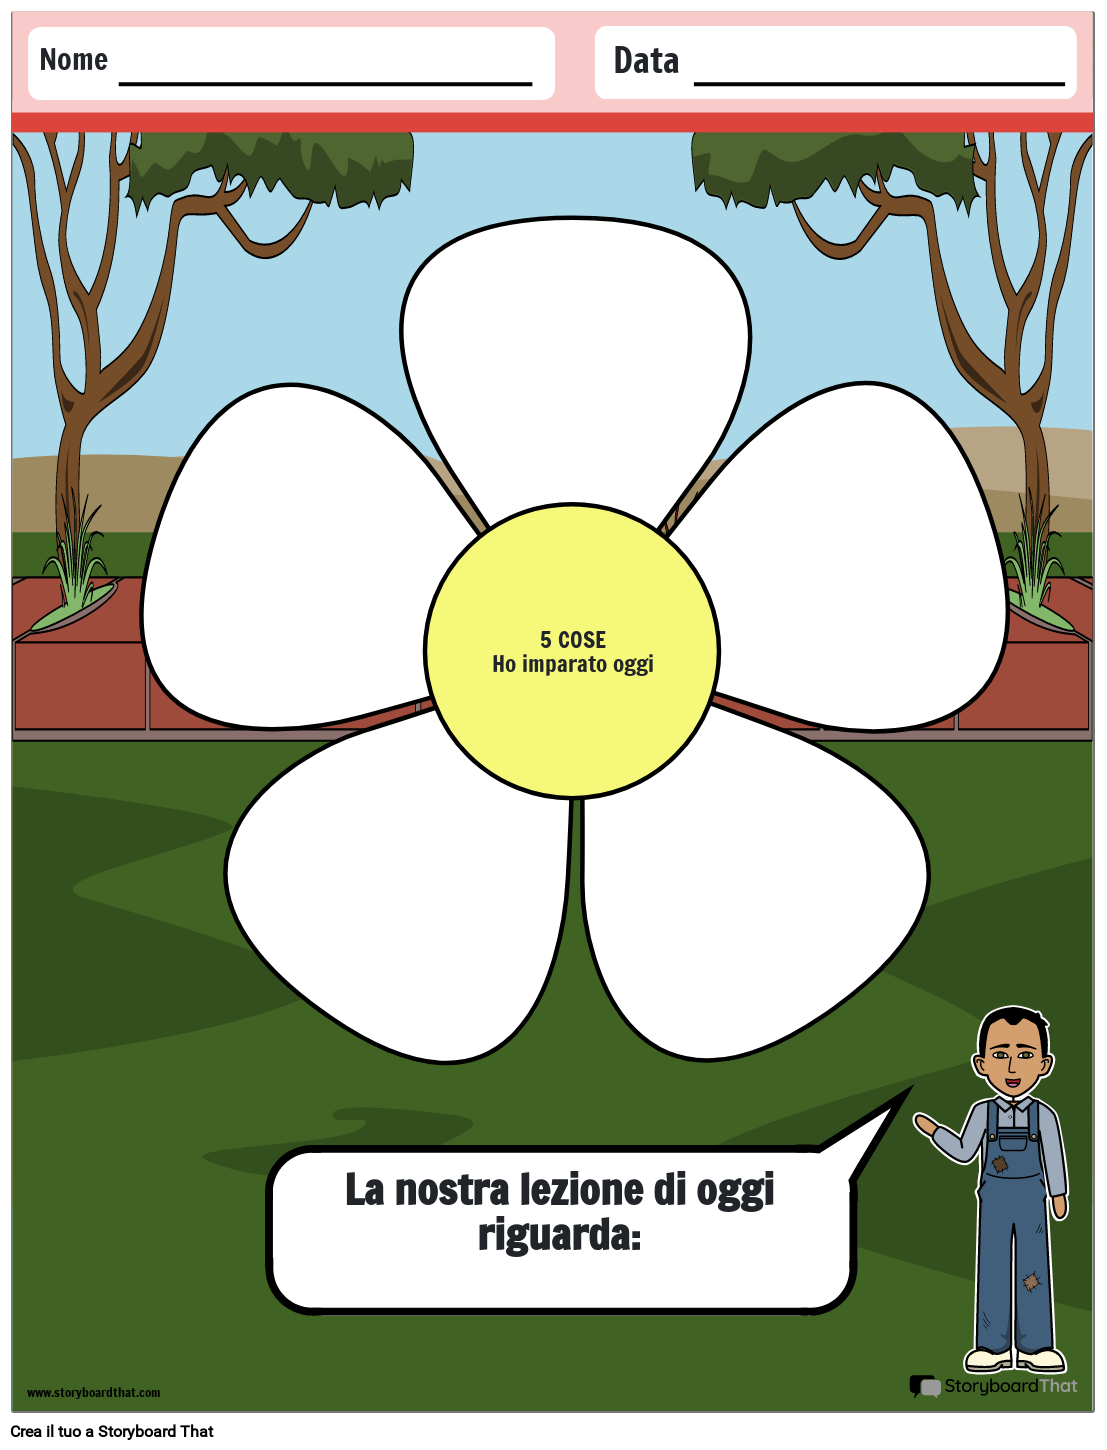 Modello Bloom of Learning